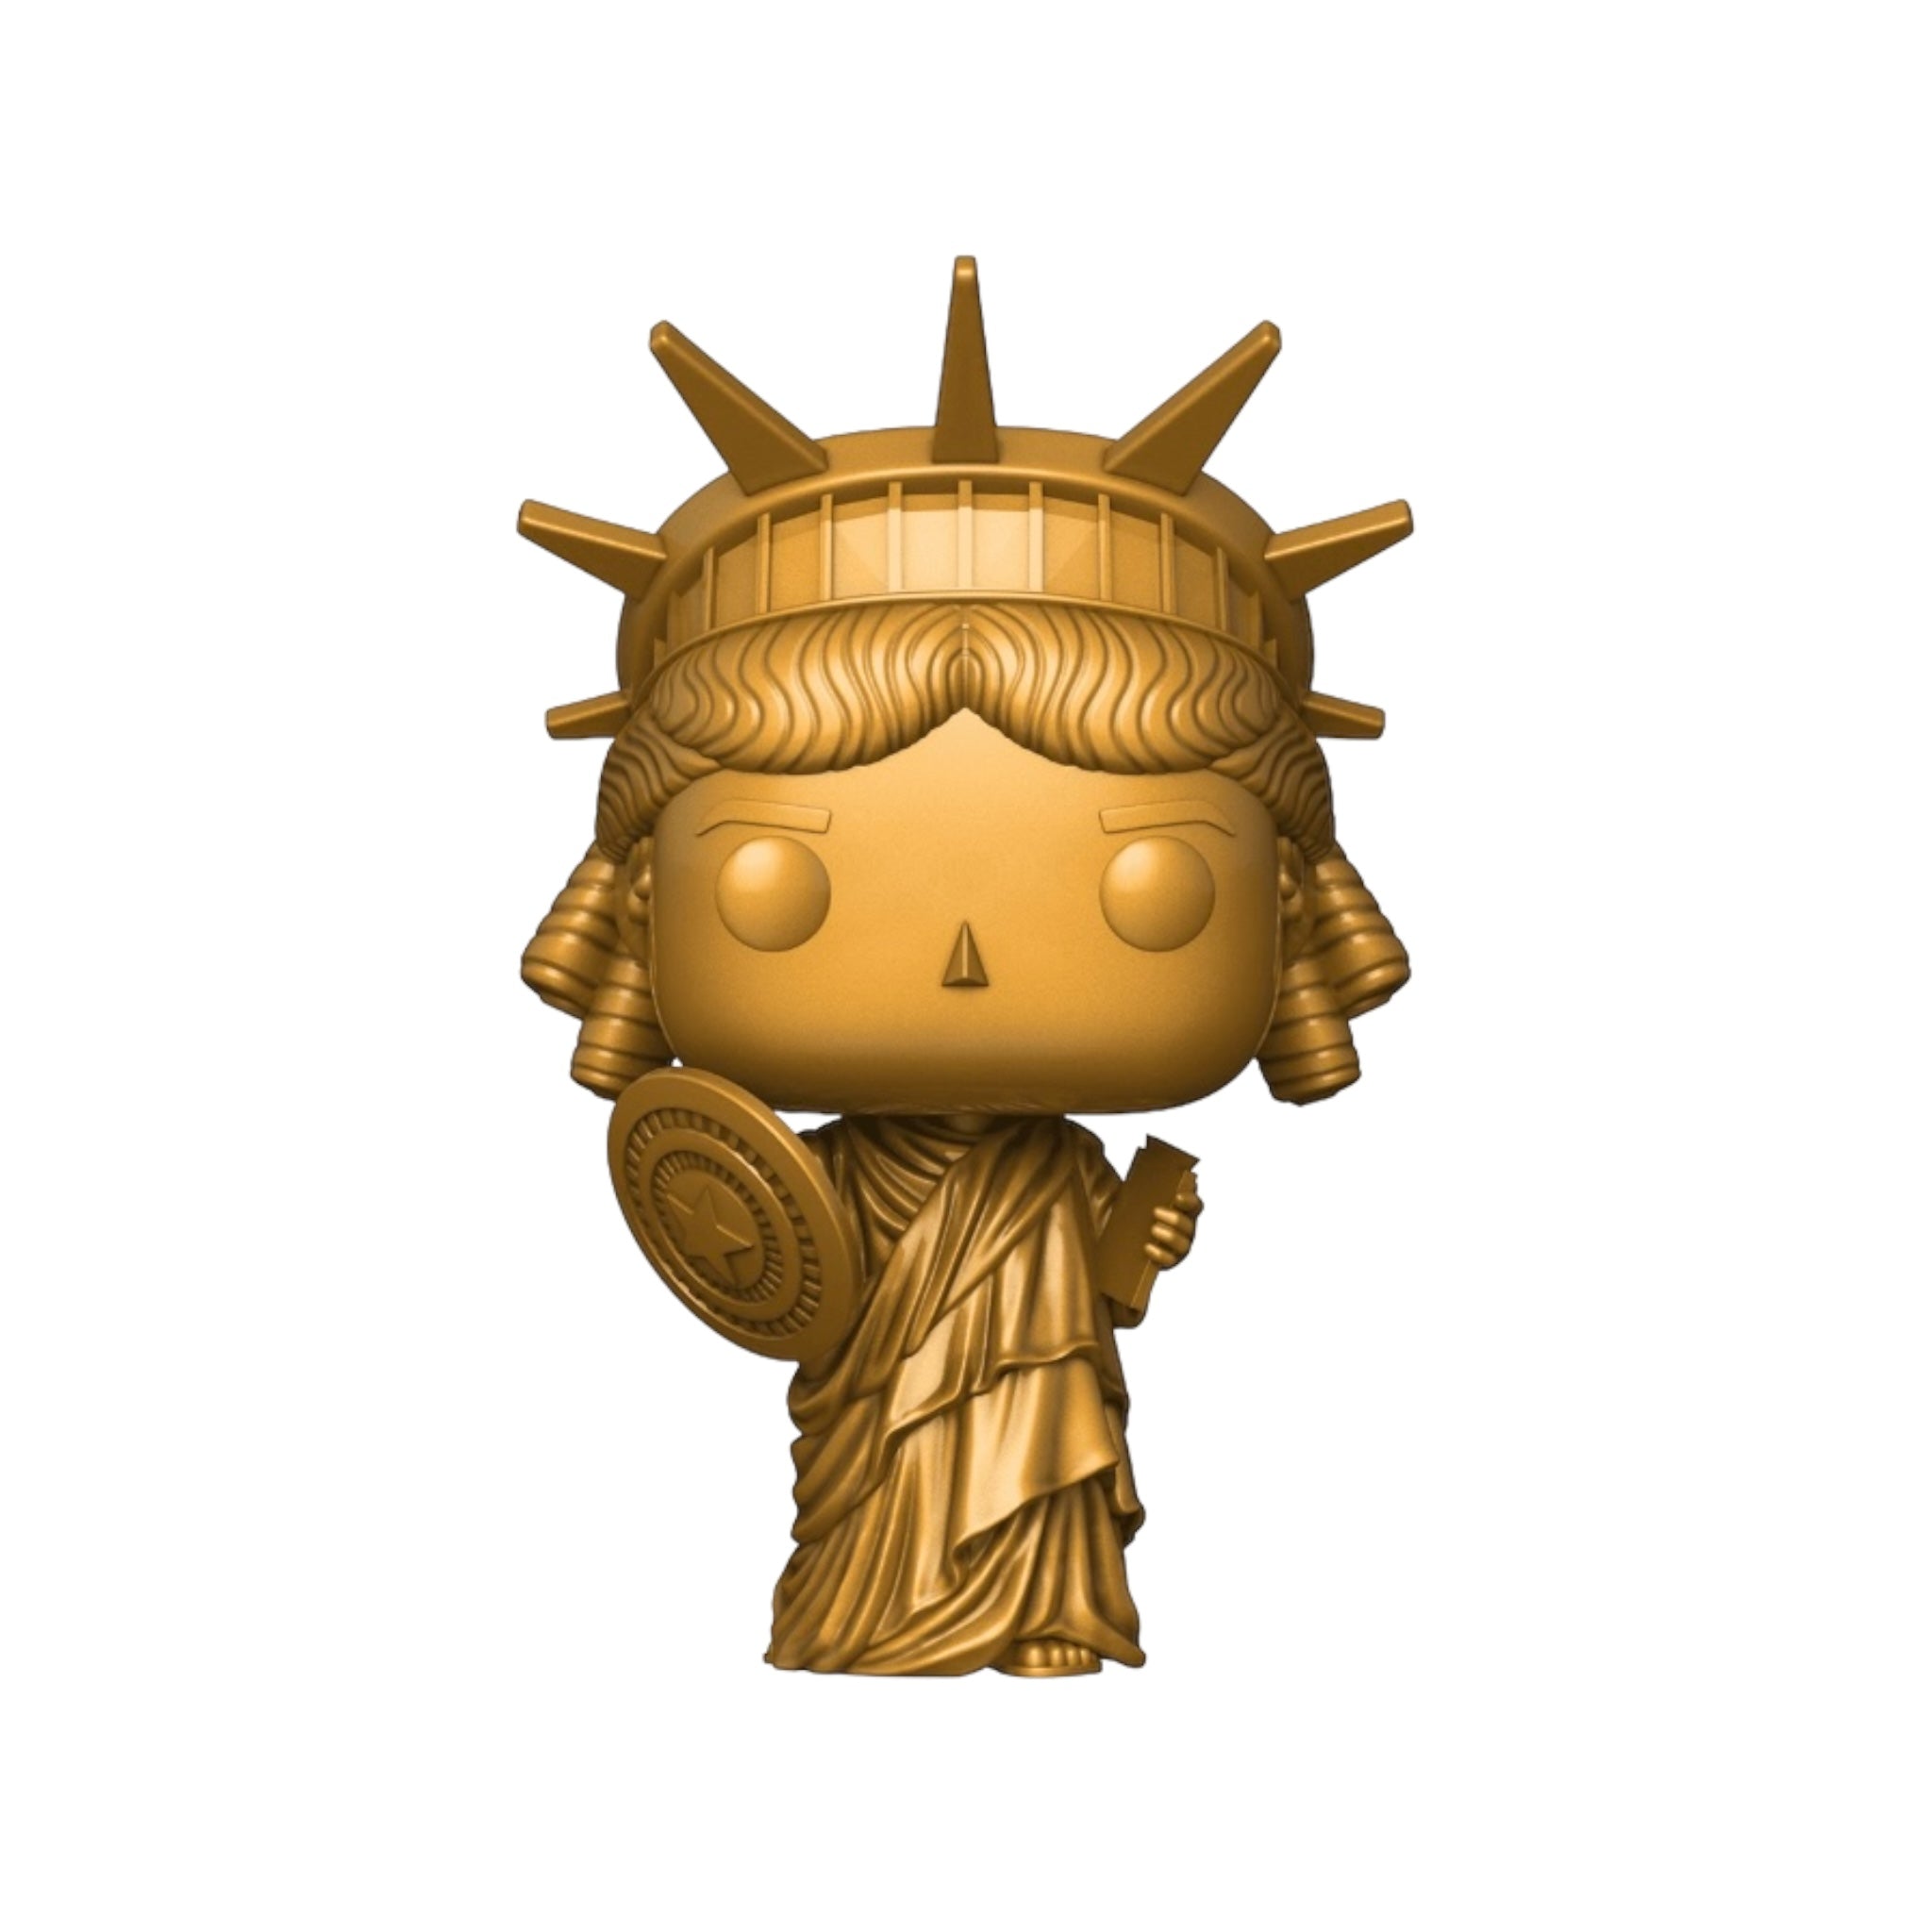 Statue of Liberty #1123 Funko Pop! - Spider-Man: No Way Home - NYCC 2022 Shared Exclusive